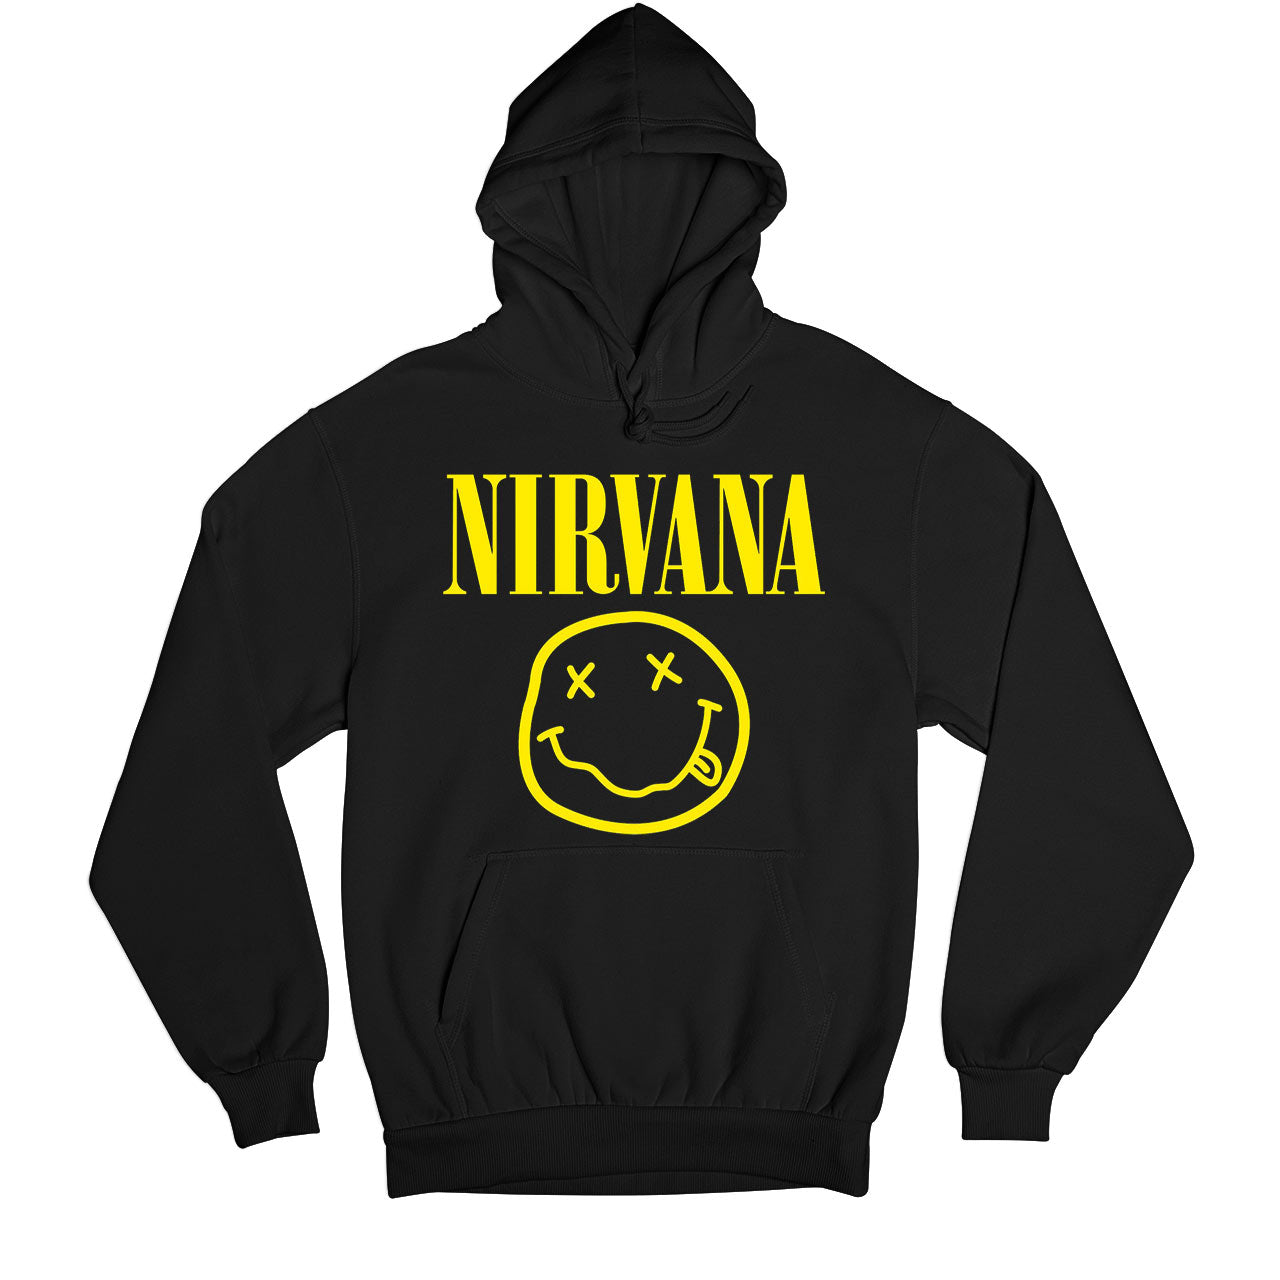 Nirvana Hoodie - On Sale - S (Chest size 40 IN)